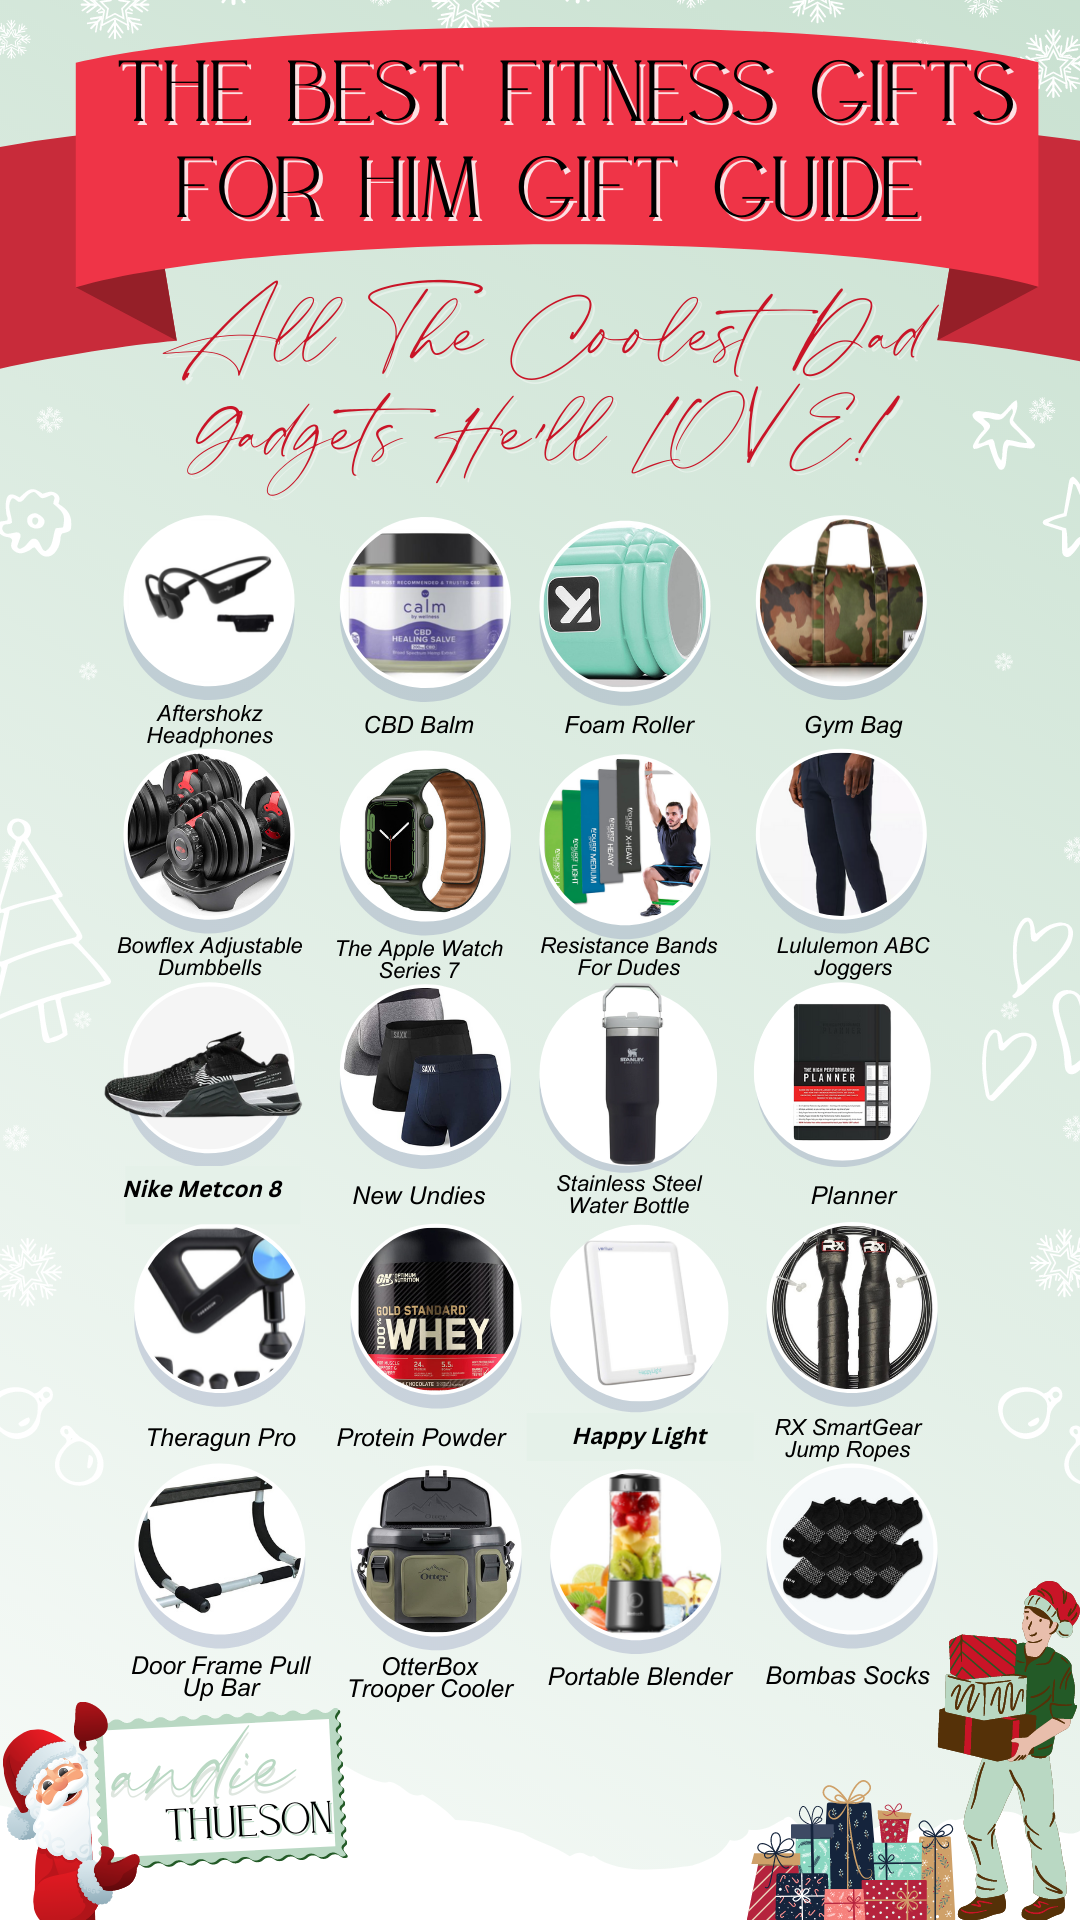 The Best Fitness Gifts For Him, Gifts He'll Love + Use! - Andie Thueson